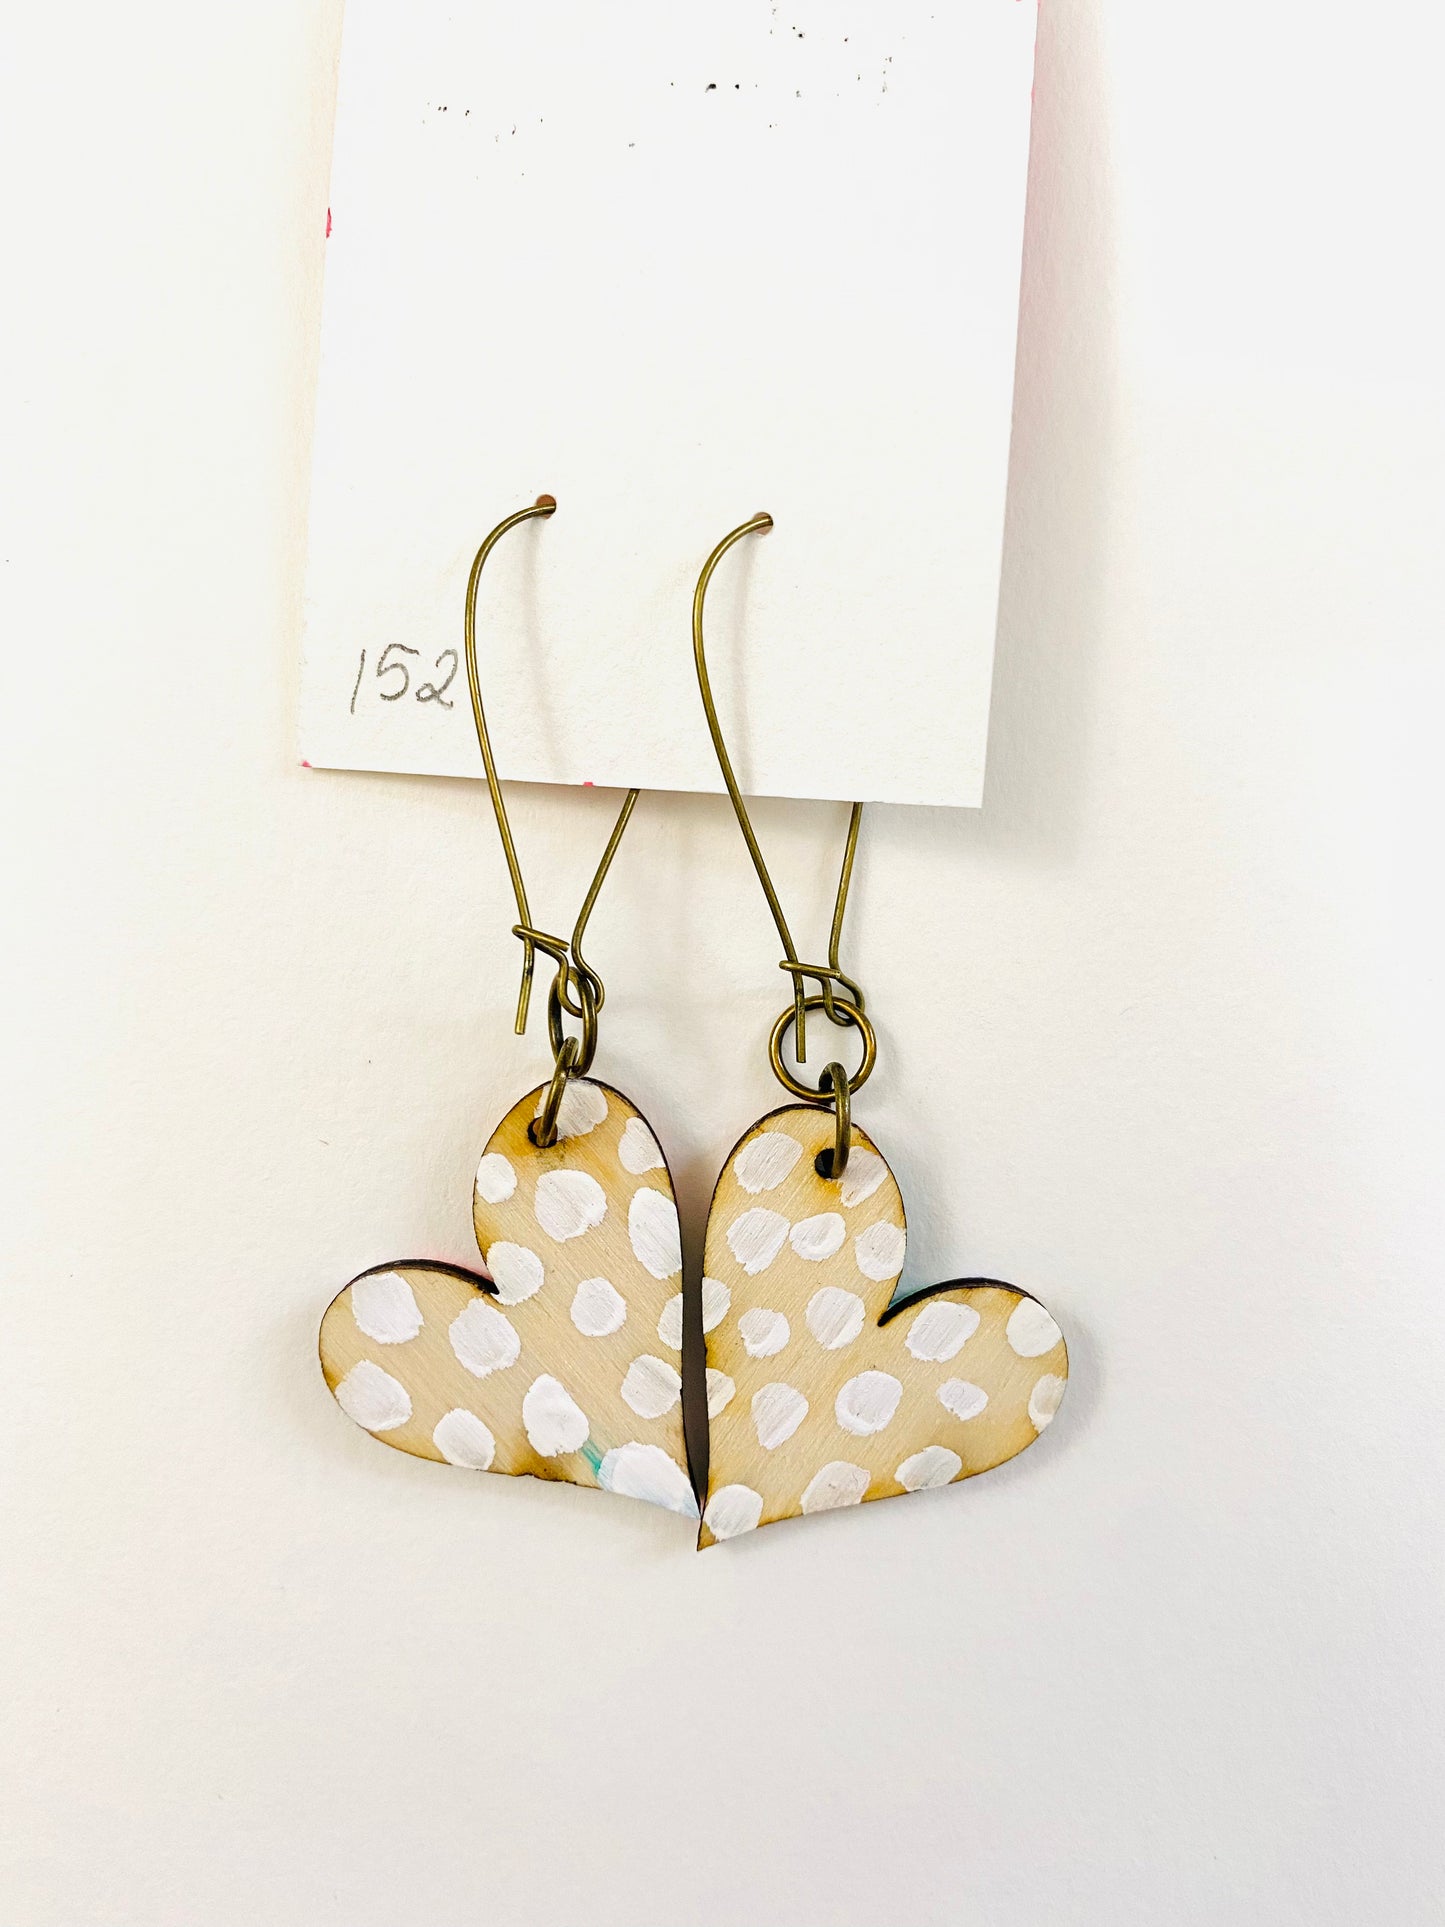 Colorful, Hand Painted, Heart Shaped Earrings 152